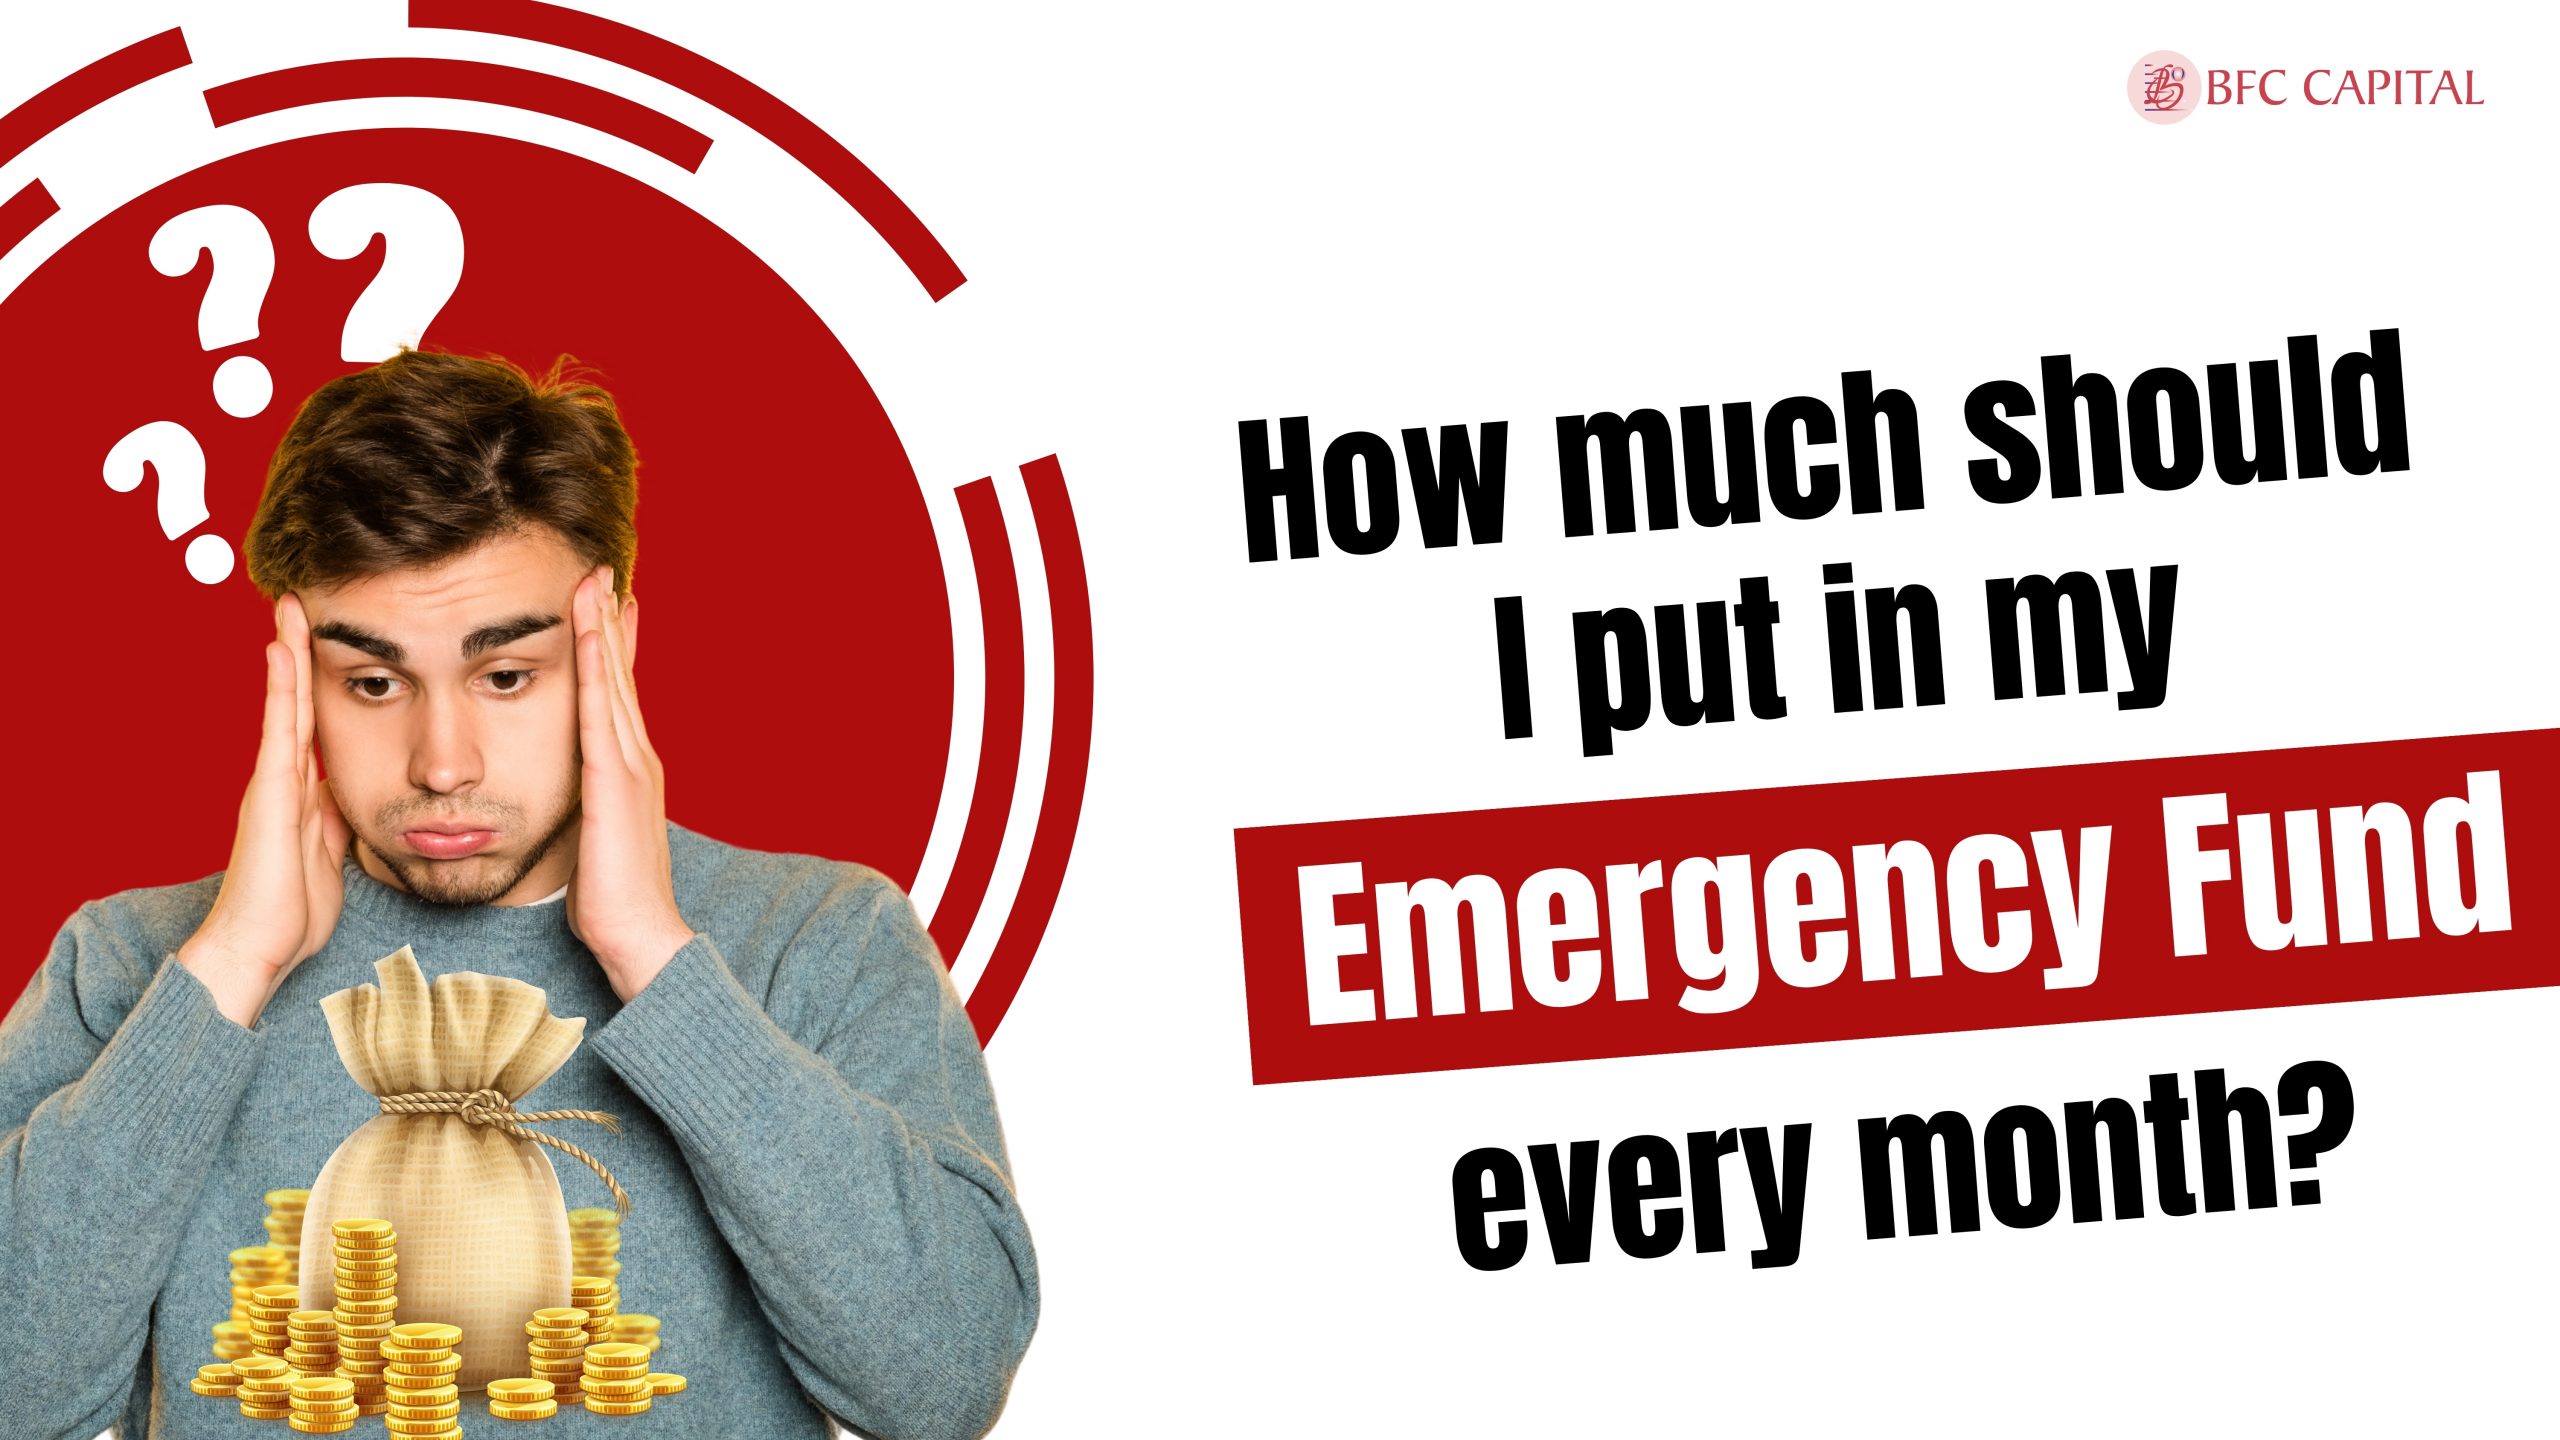 How much should I put in my Emergency Fund every month?